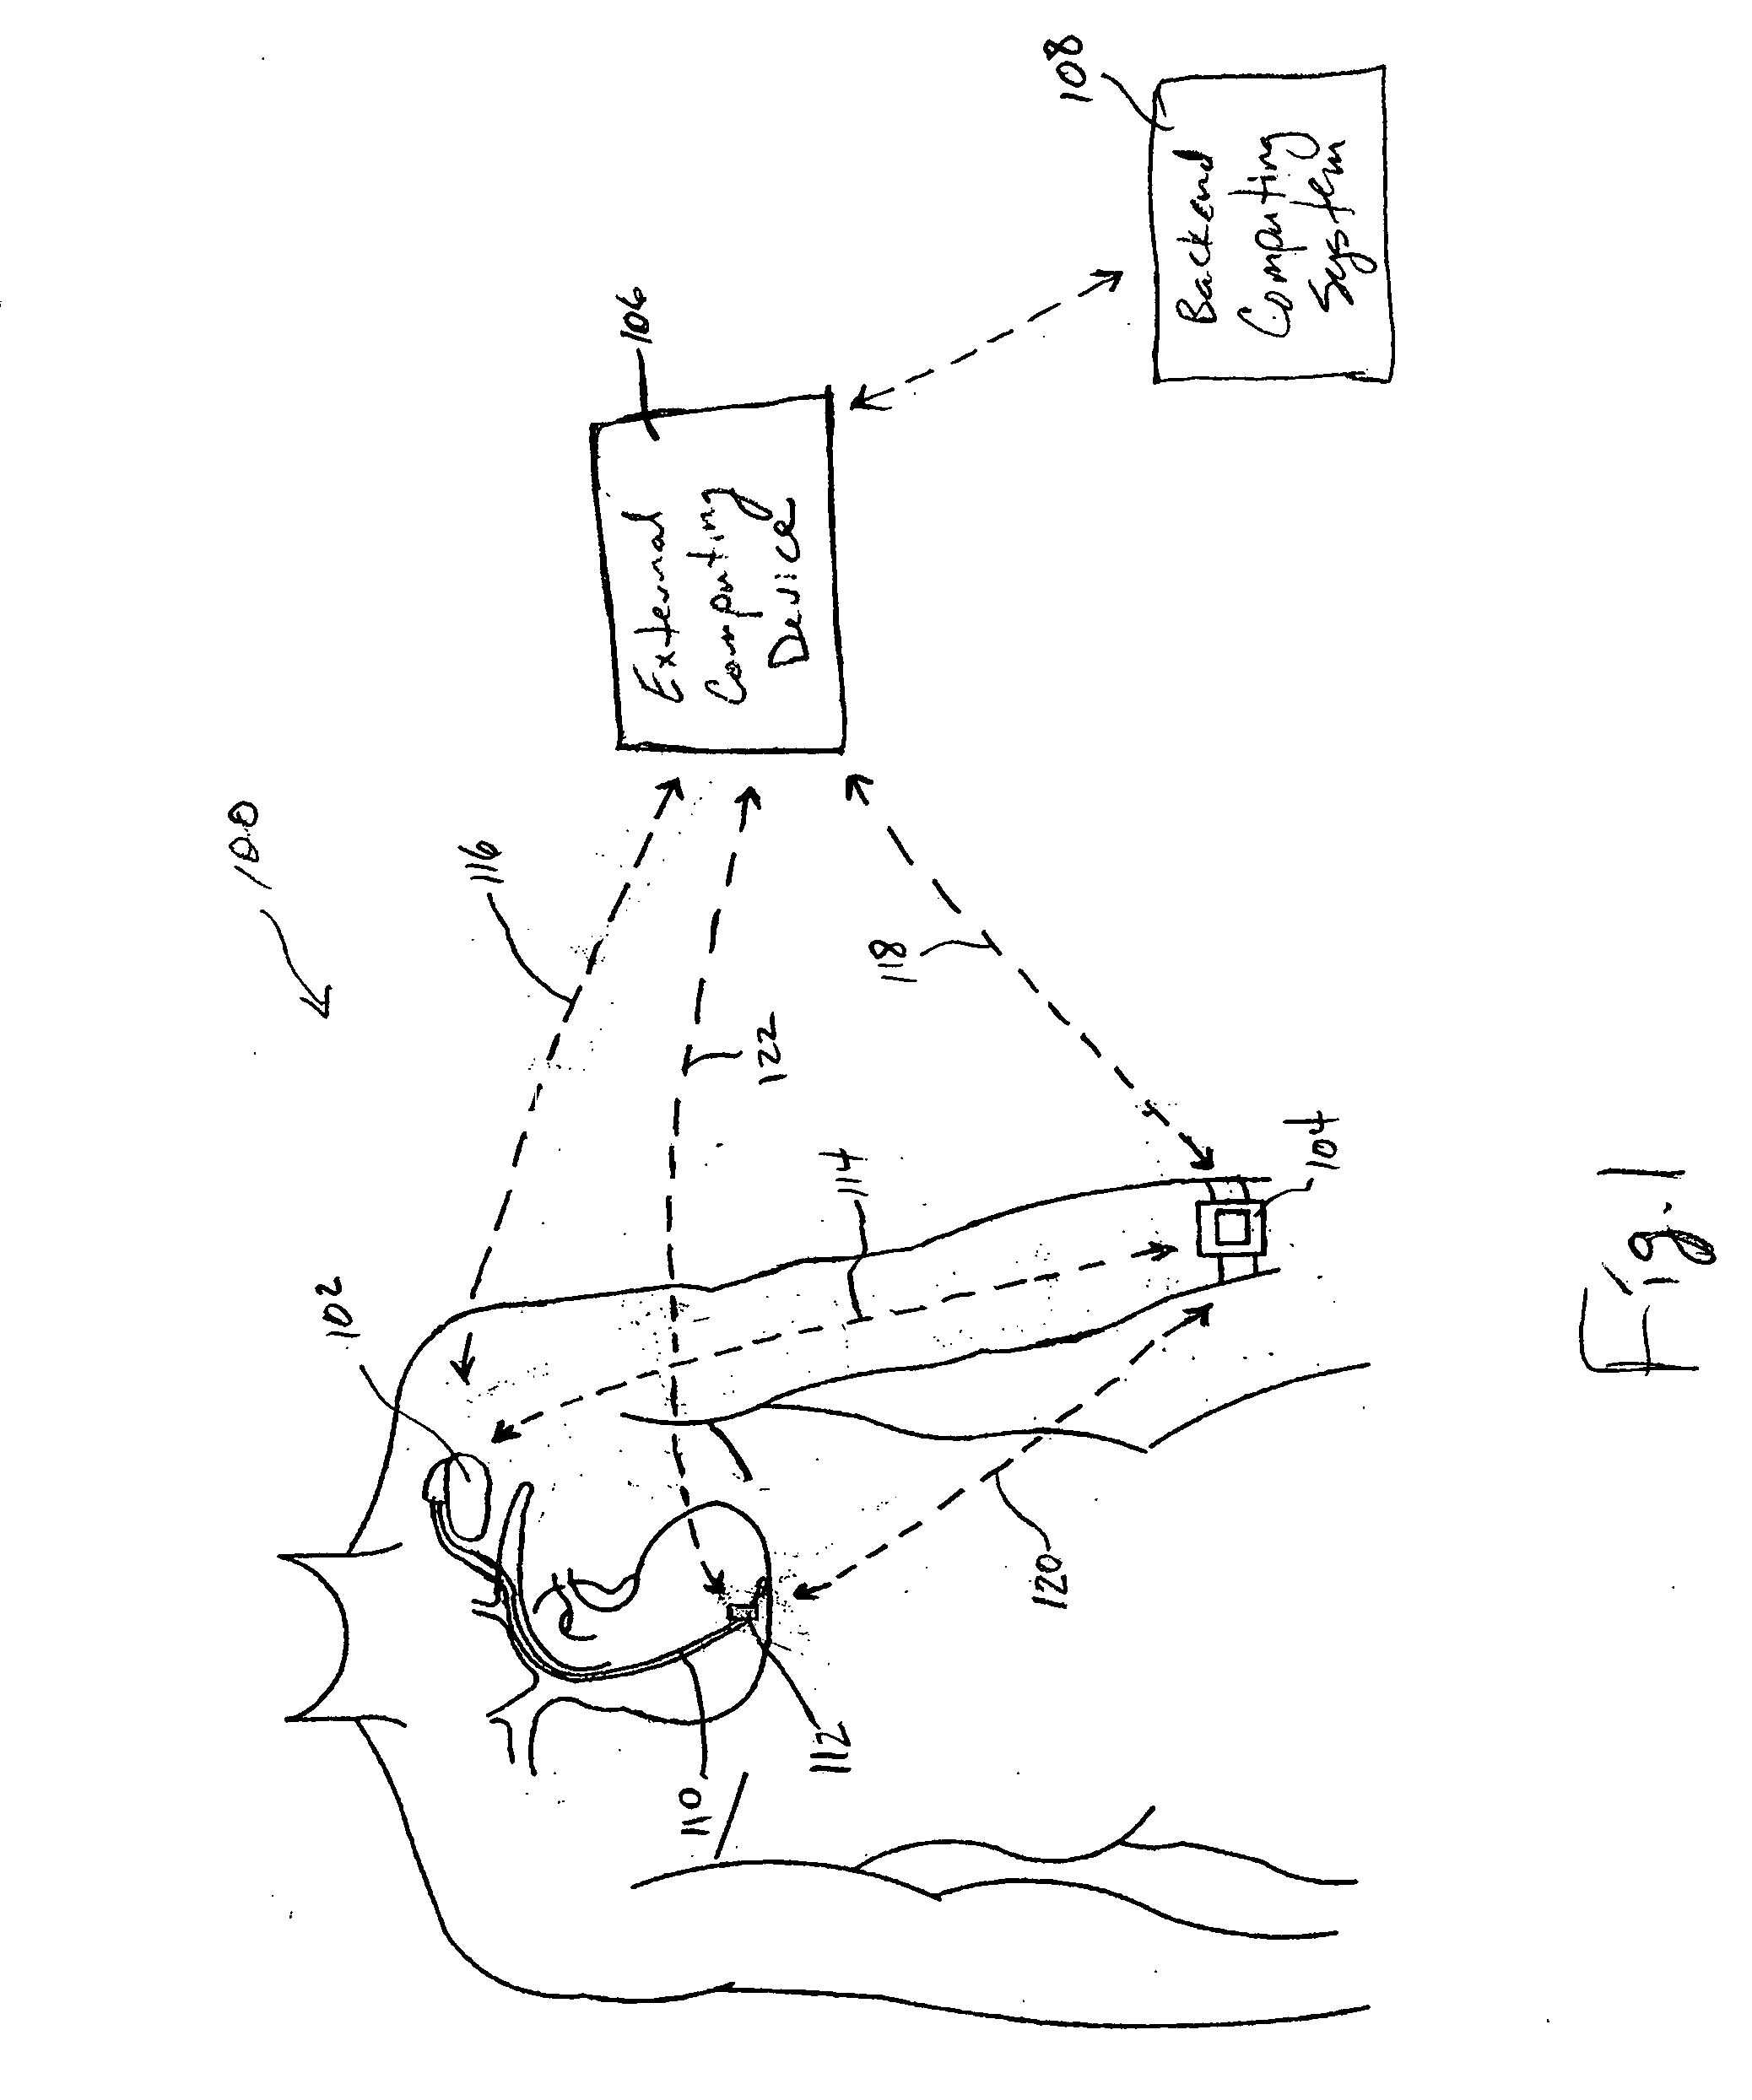 Systems and methods for deriving relative physiologic measurements using an implanted sensor device